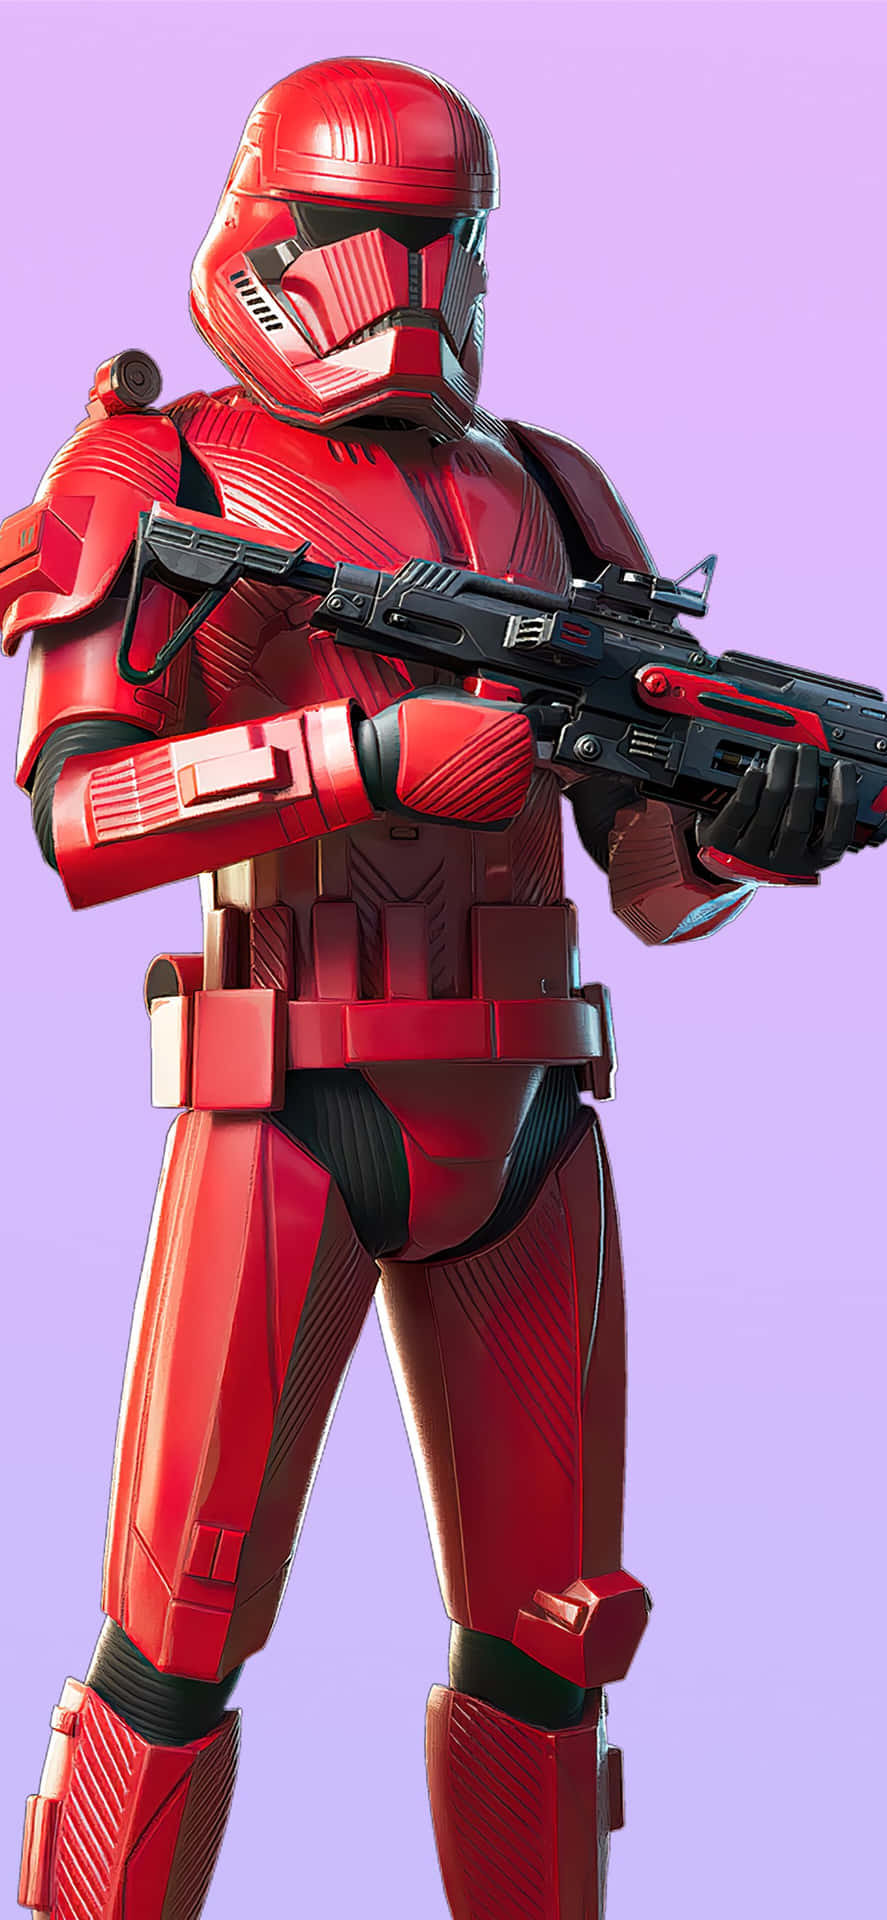 Get the Ultra-Rare Ruby Skin Now in Fortnite Wallpaper